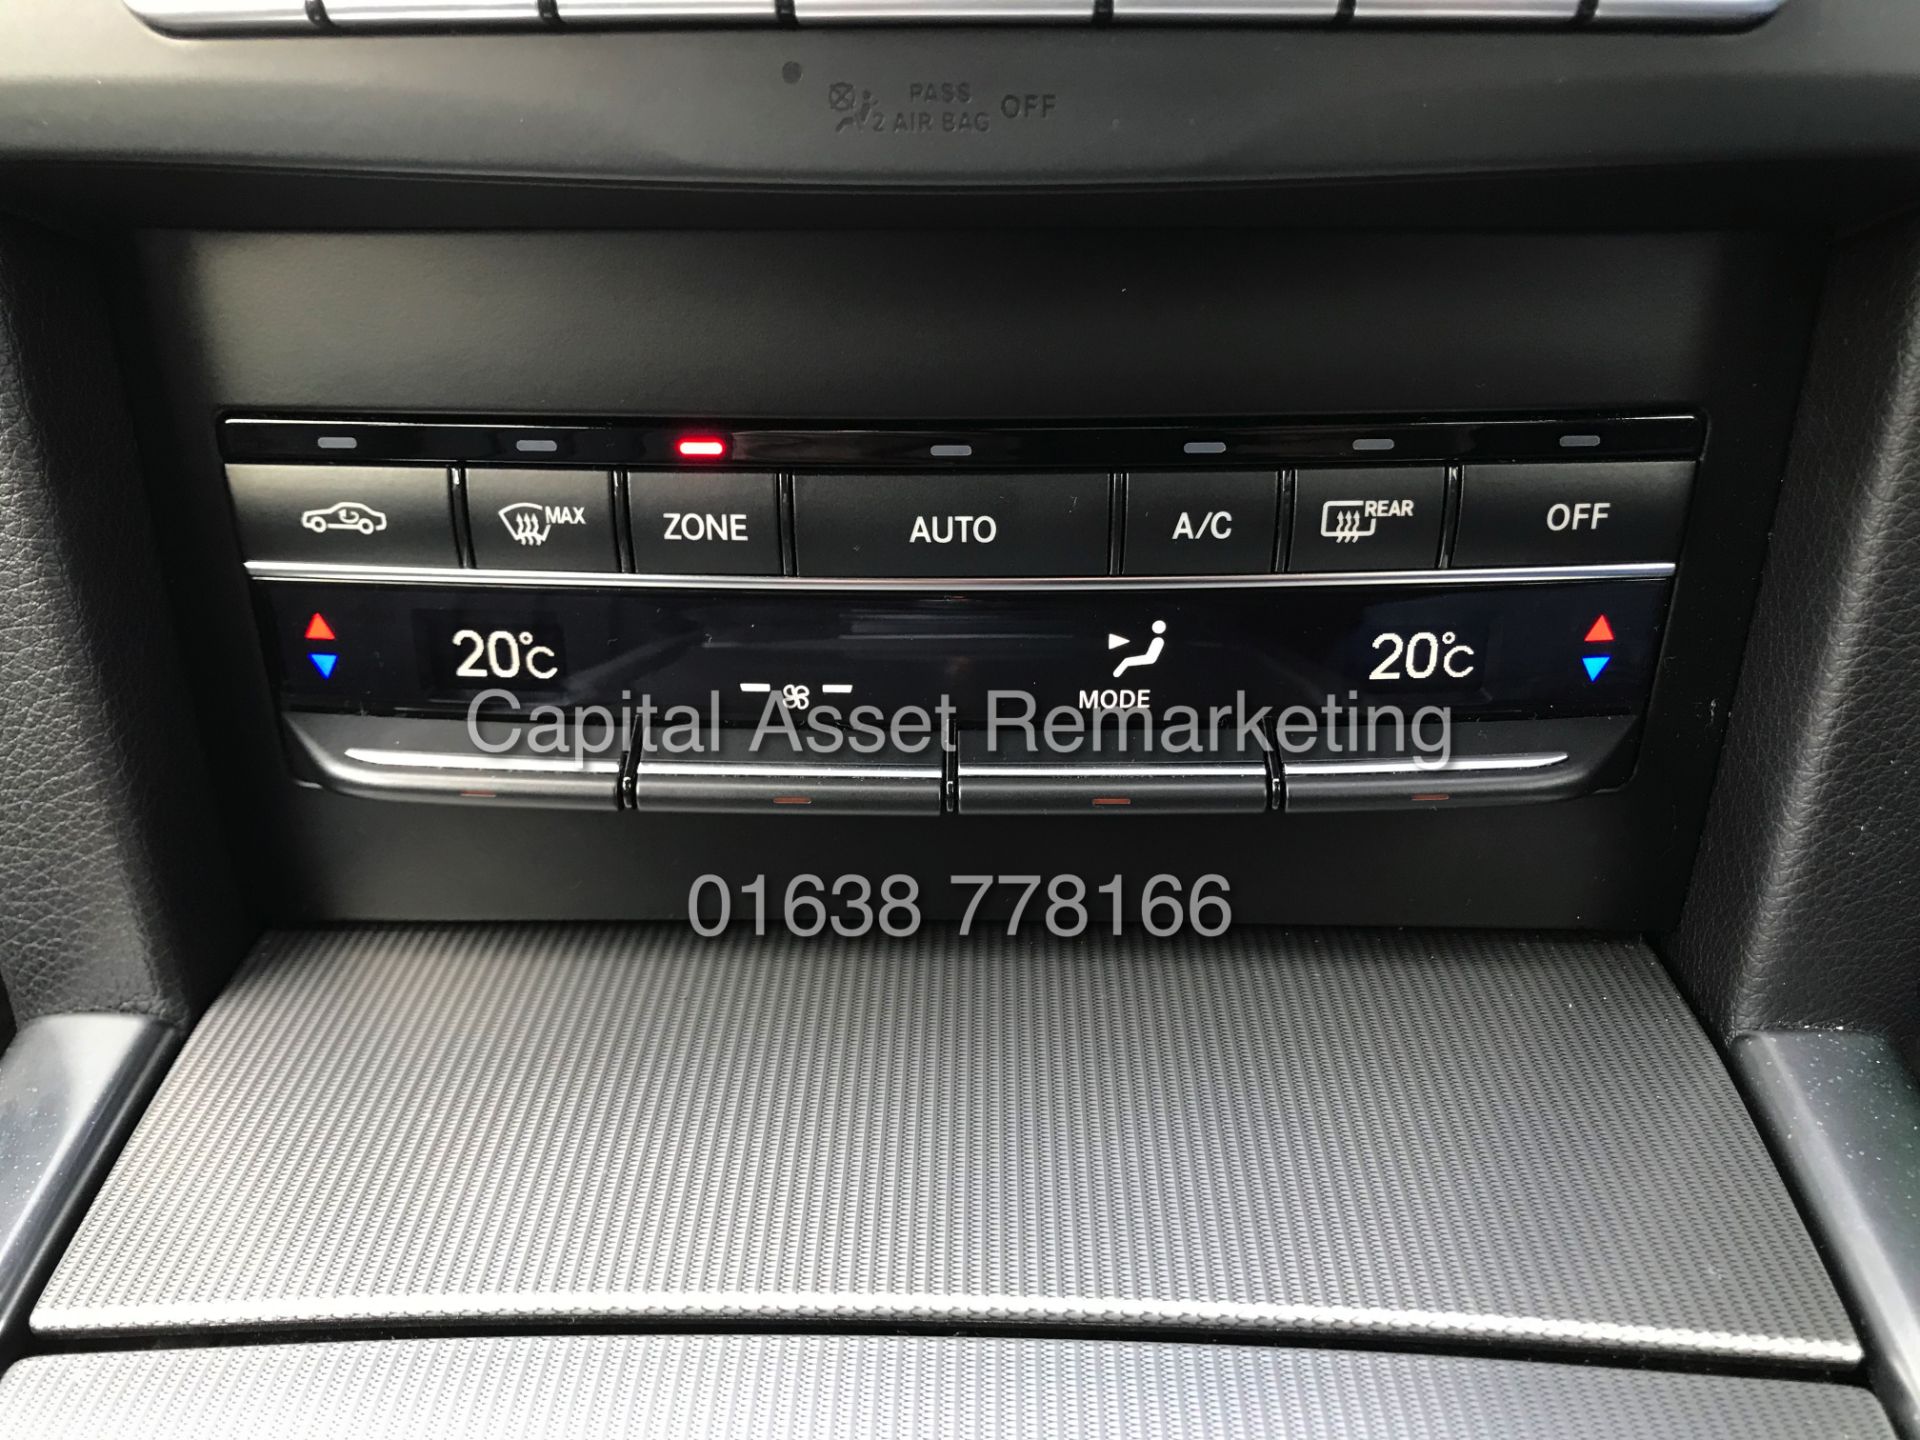 MERCEDES E220d "SPECIAL EQUIPMENT" 7G TRONIC AUTO (2015 MODEL) 1 OWNER - SAT NAV - LEATHER - Image 21 of 26